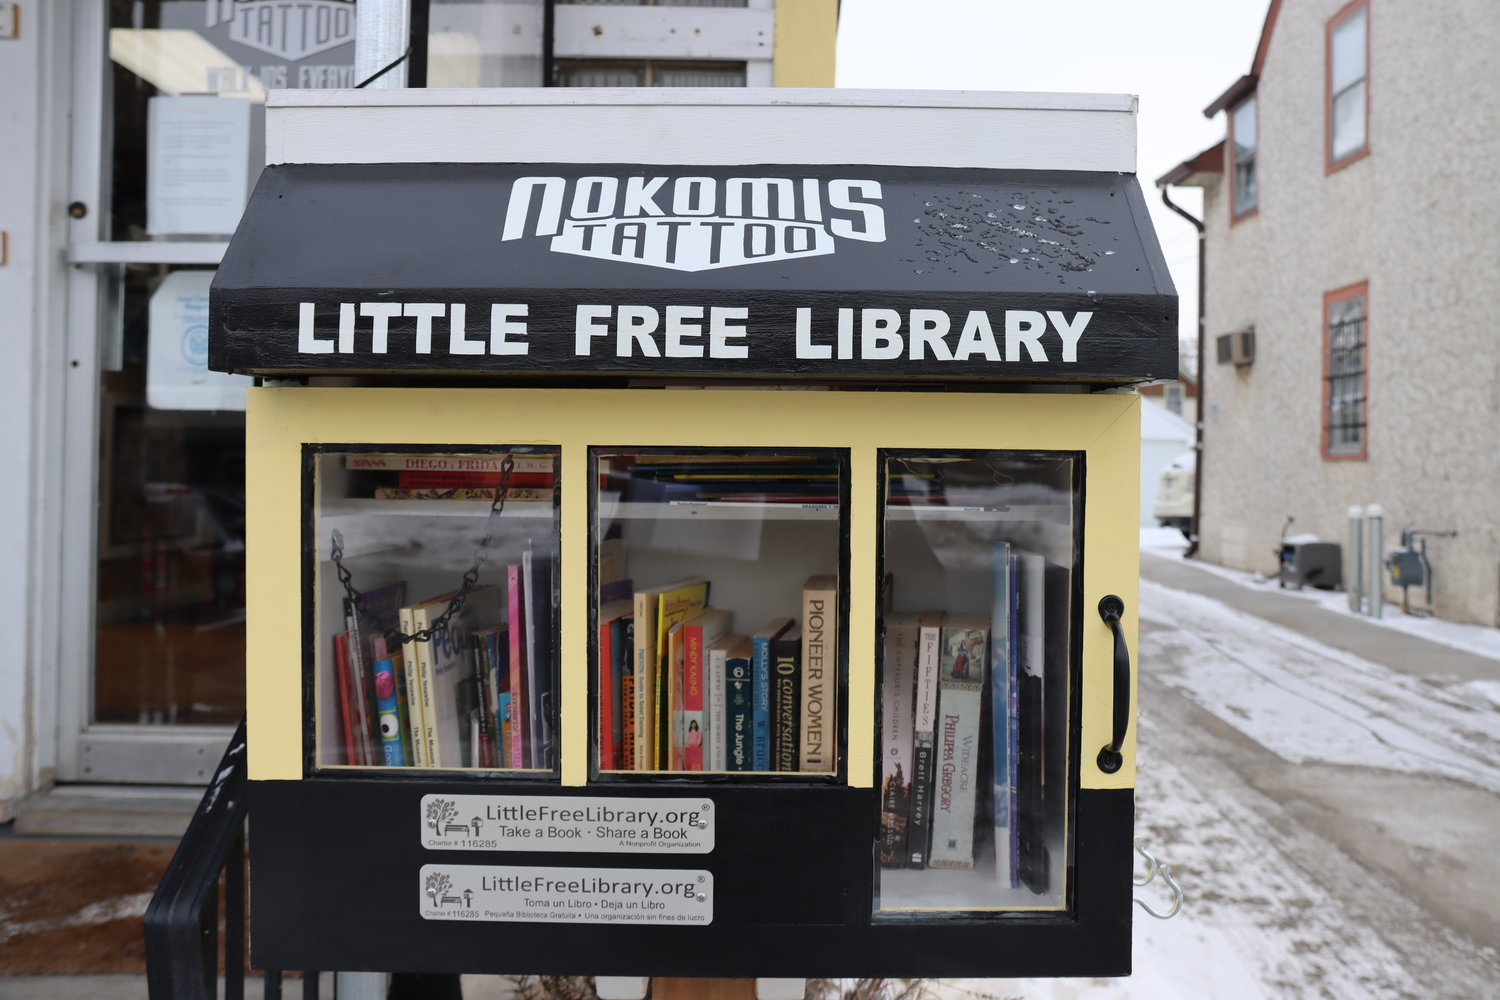 The newly created bilingual (Spanish and English) Little Free Library in front of Nokomis Tattoo.